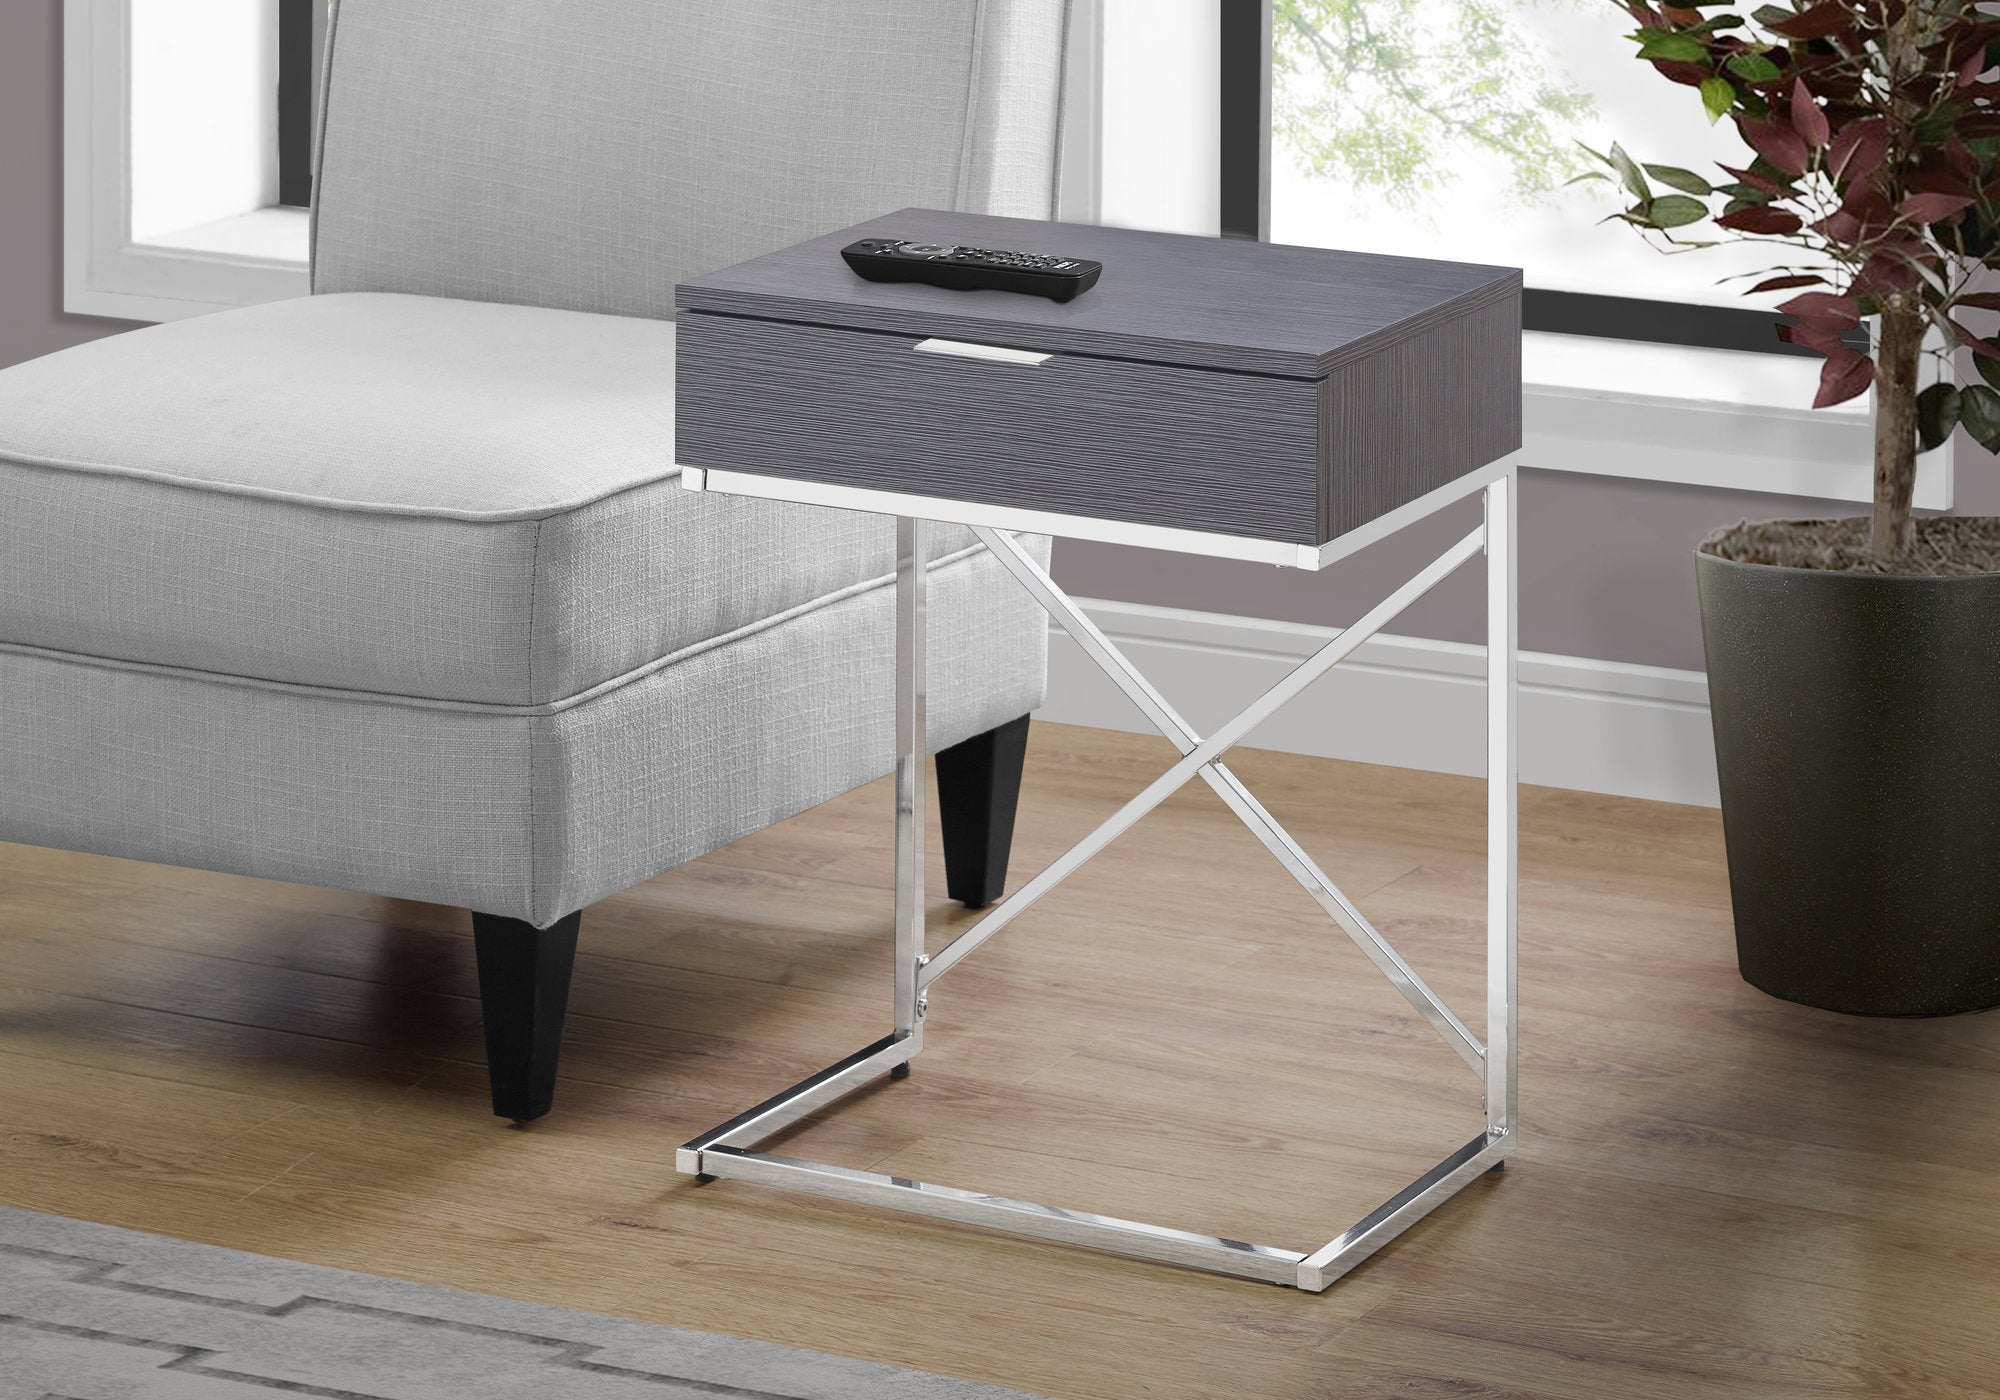 MN-833474    Accent Table, Side, End, Nightstand, Lamp, Living Room, Bedroom, Metal Legs, Laminate, Grey, Chrome, Contemporary, Modern